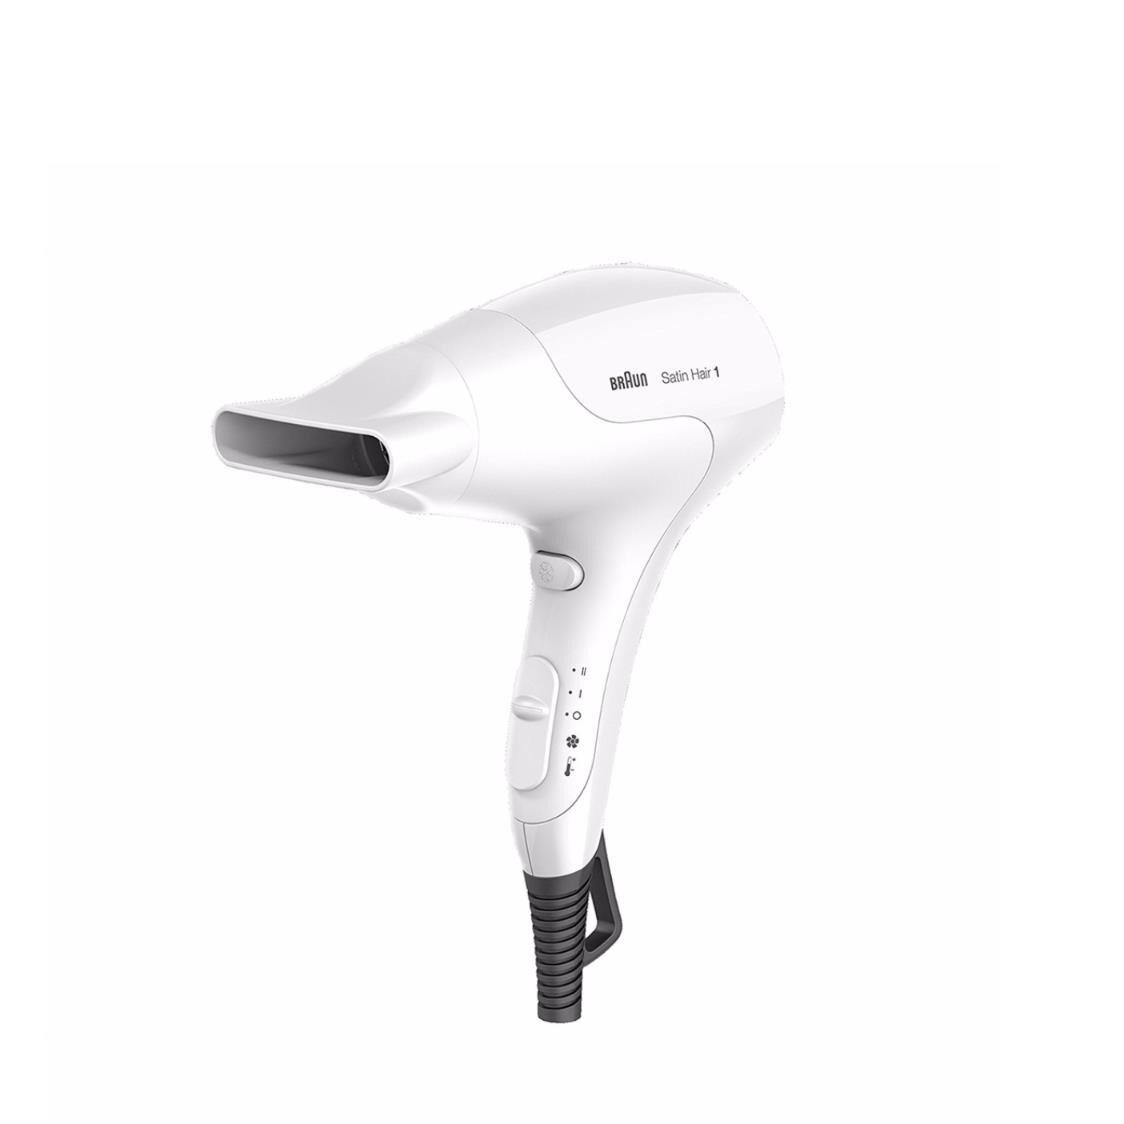 BRAUN Satin Hair 1 HD 180 IONTEC Ionic Hair Dryer Ions with Temperature and Airflow Speed Setting